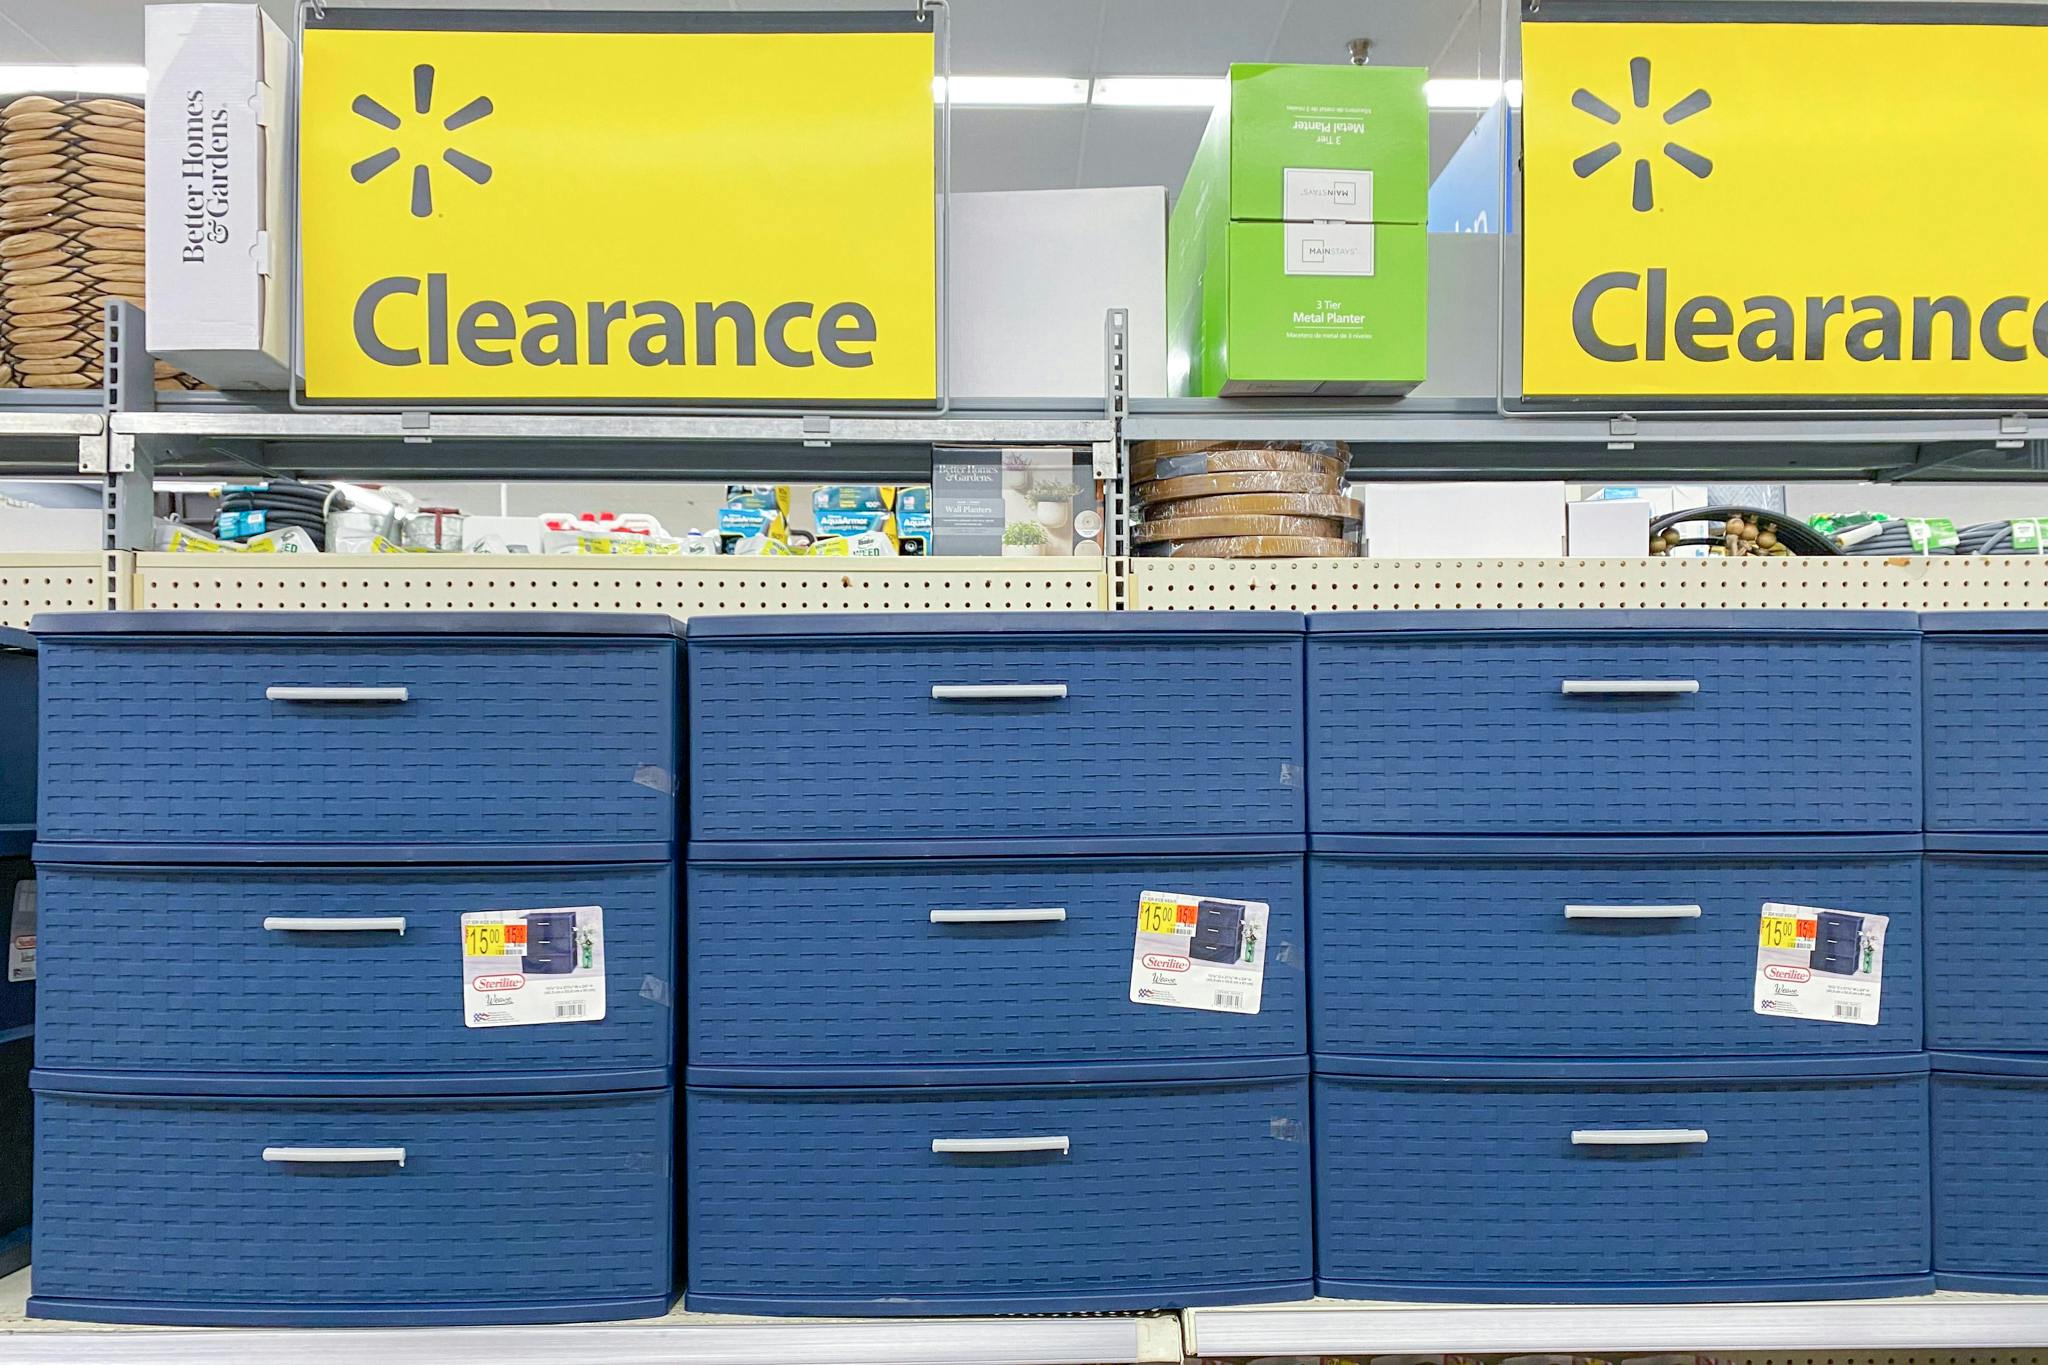 Sterilite Weave Tower clearance at Walmart